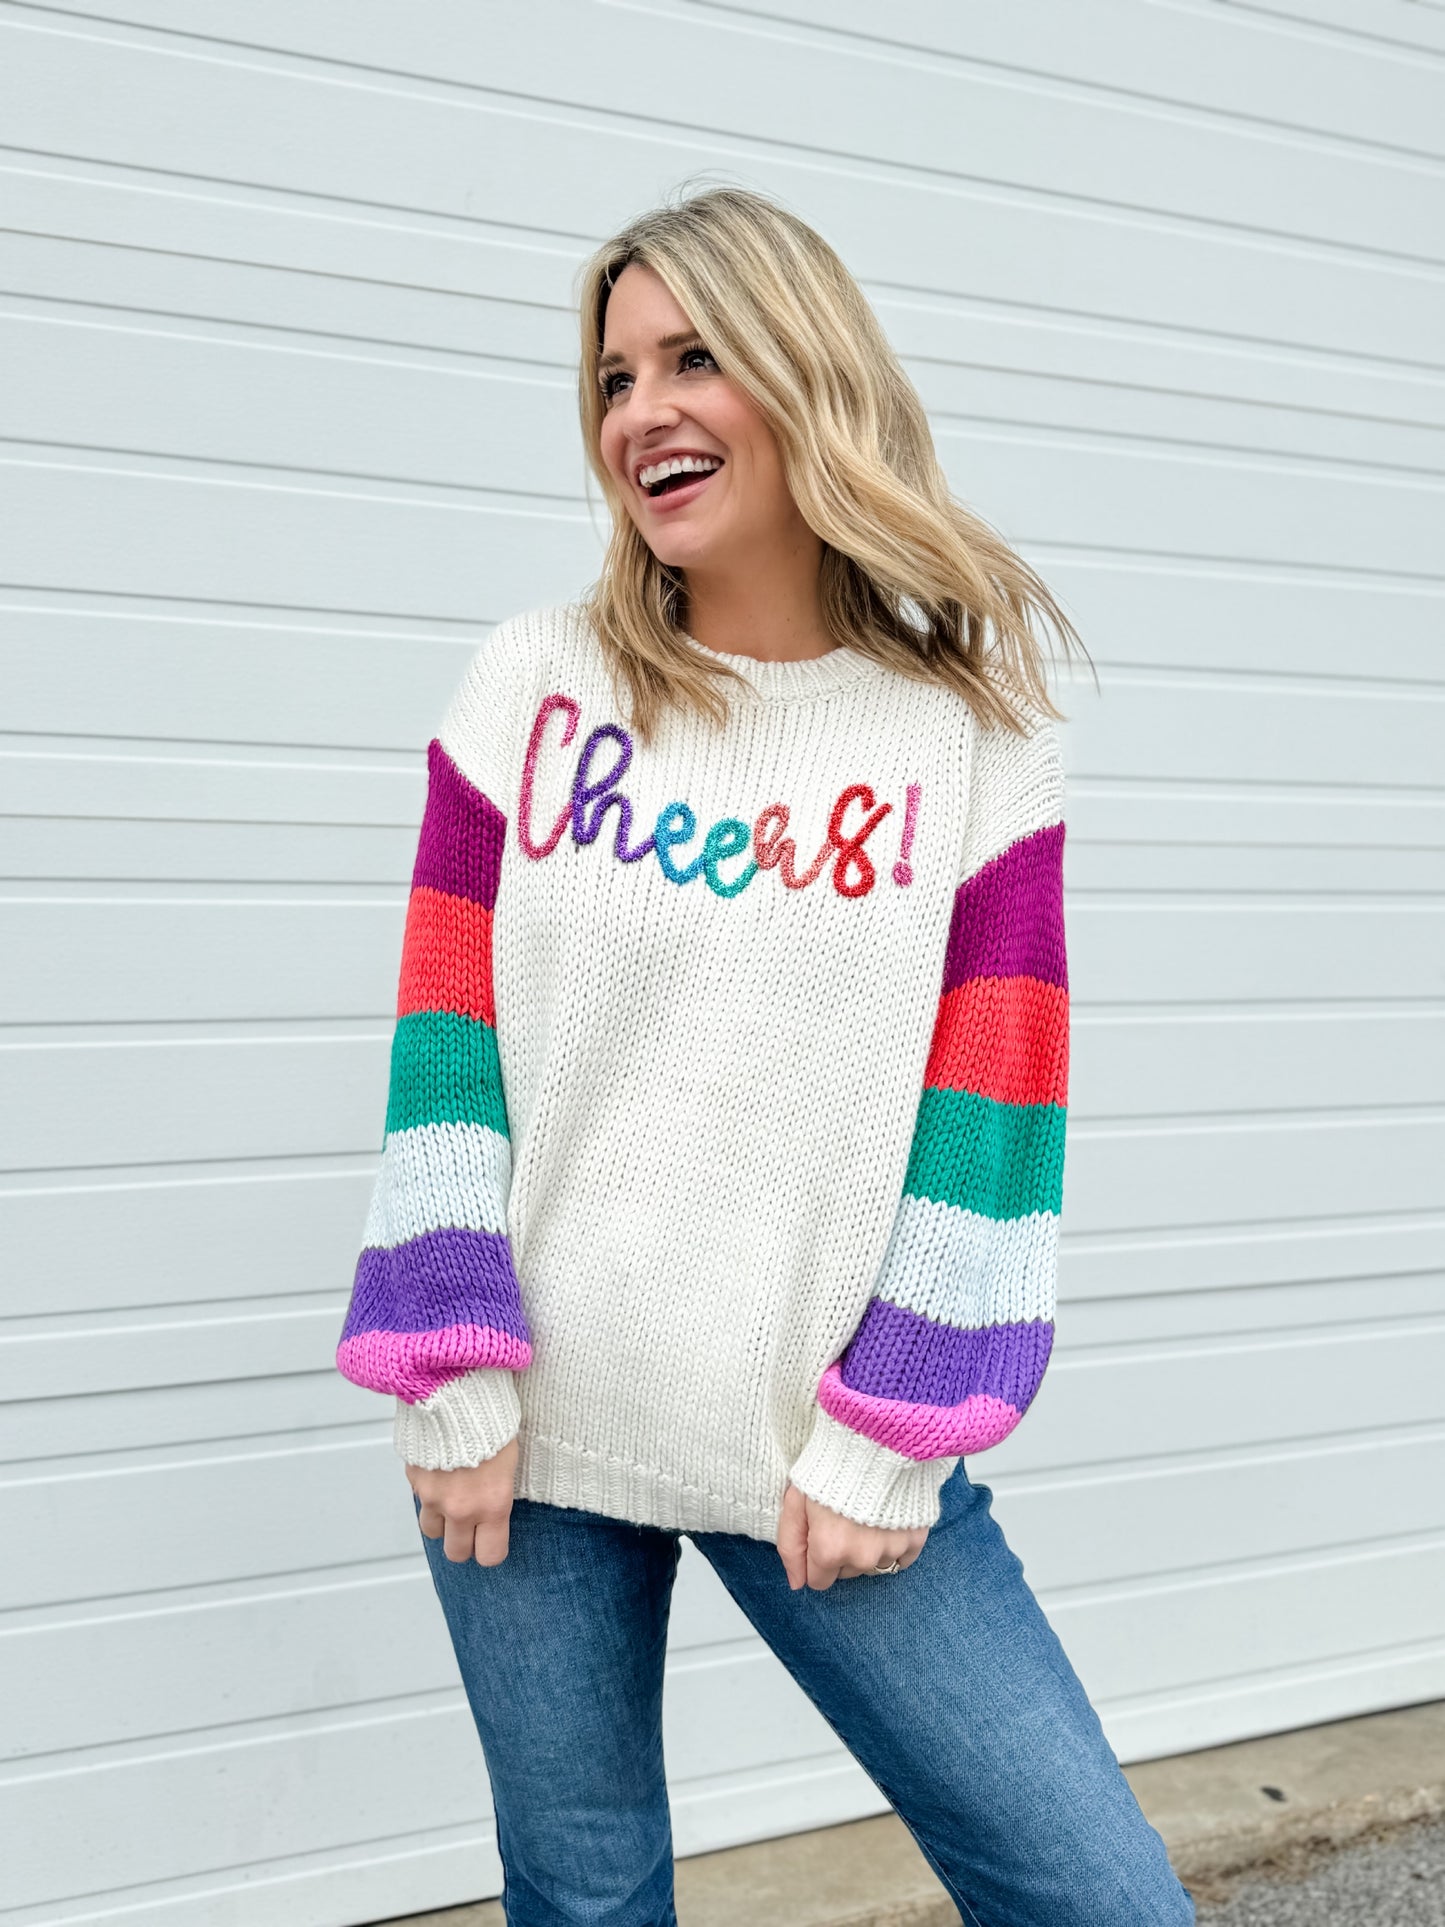 Cheers! Tinsel Colorful Sweater